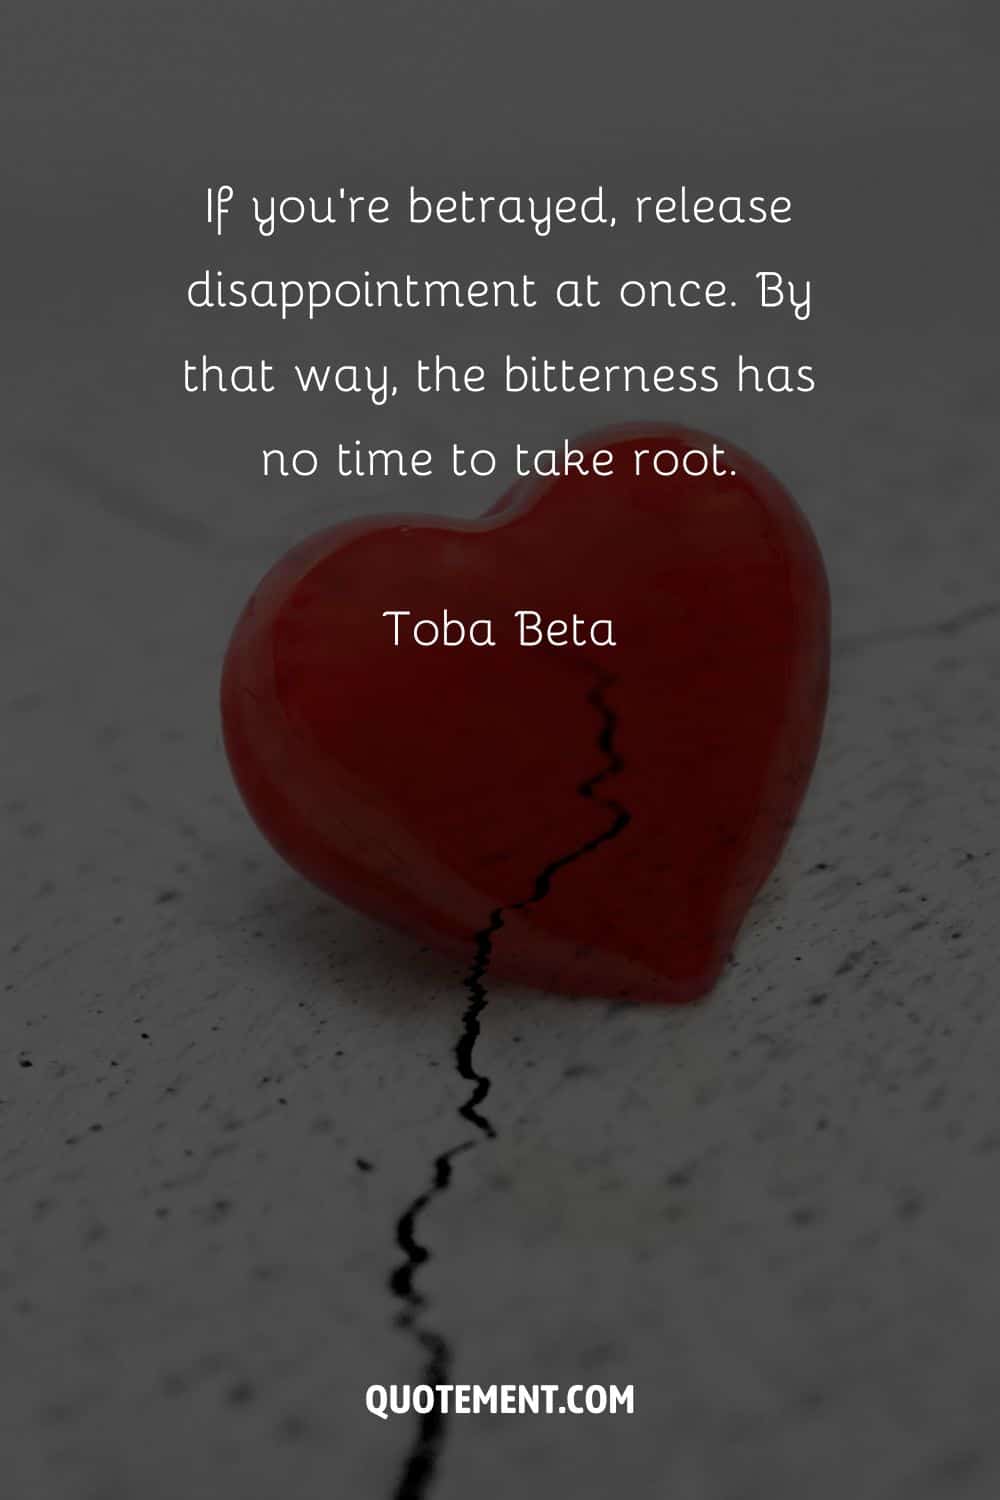 “If you're betrayed, release disappointment at once. By that way, the bitterness has no time to take root.” — Toba Beta